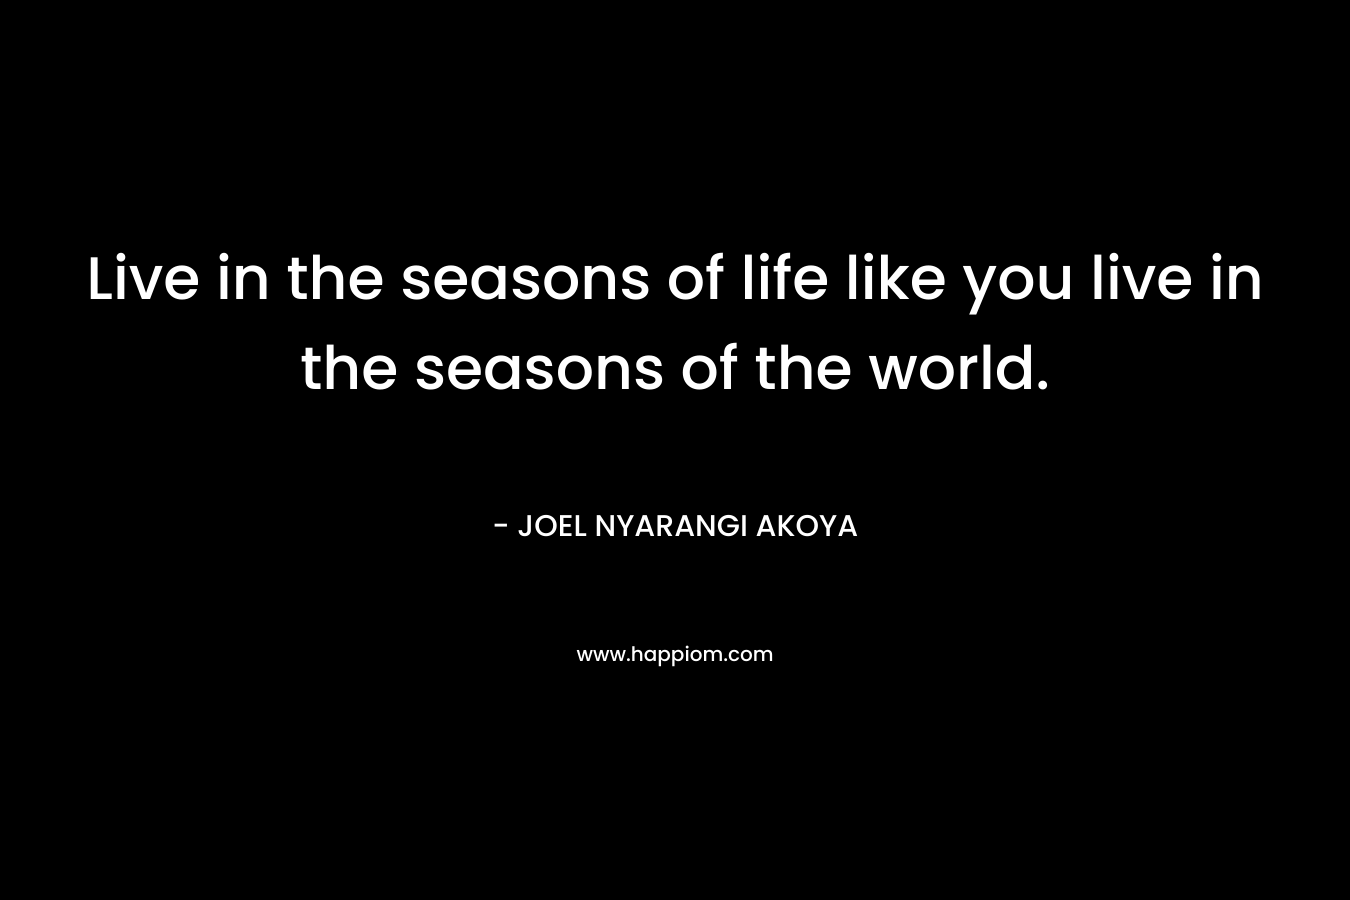 Live in the seasons of life like you live in the seasons of the world.